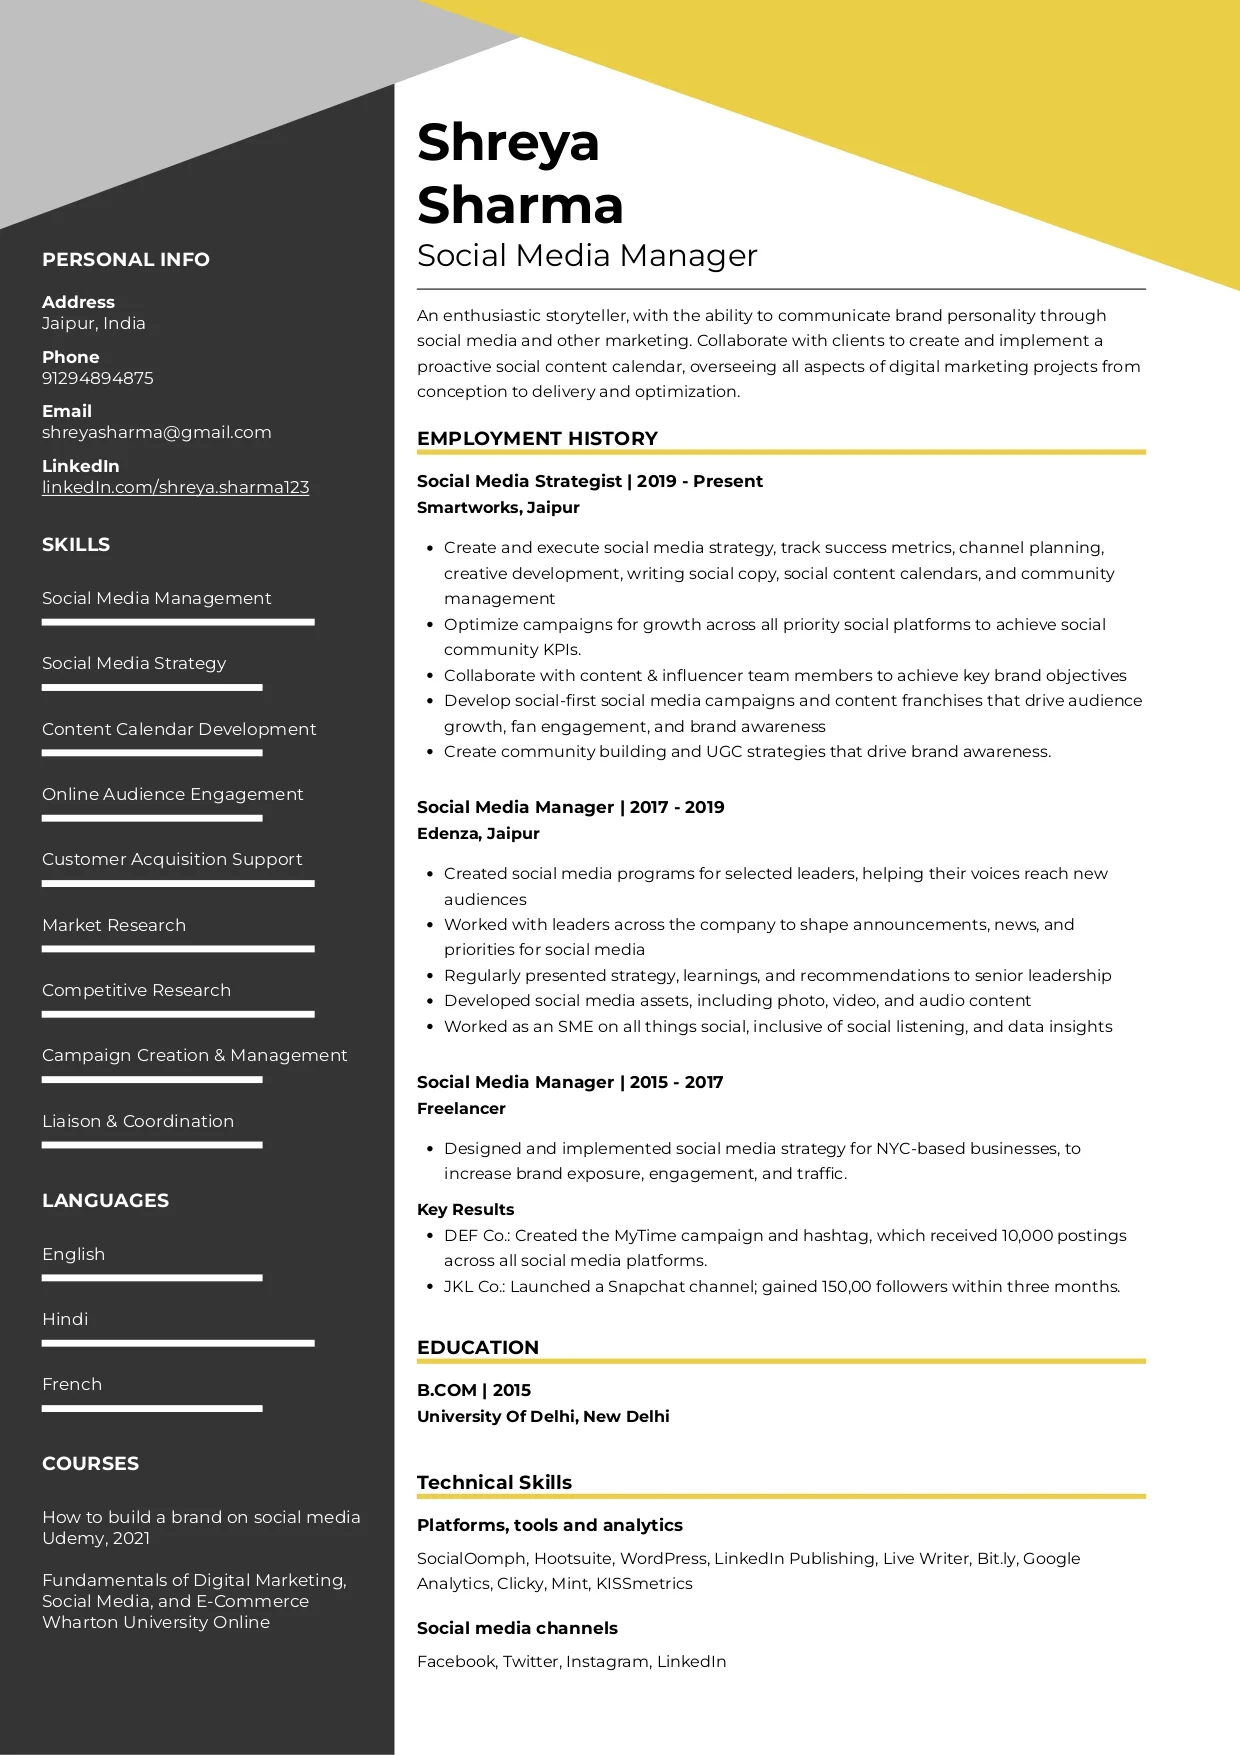 Sample Resume of Social Media Manager | Free Resume Templates & Samples on Resumod.co